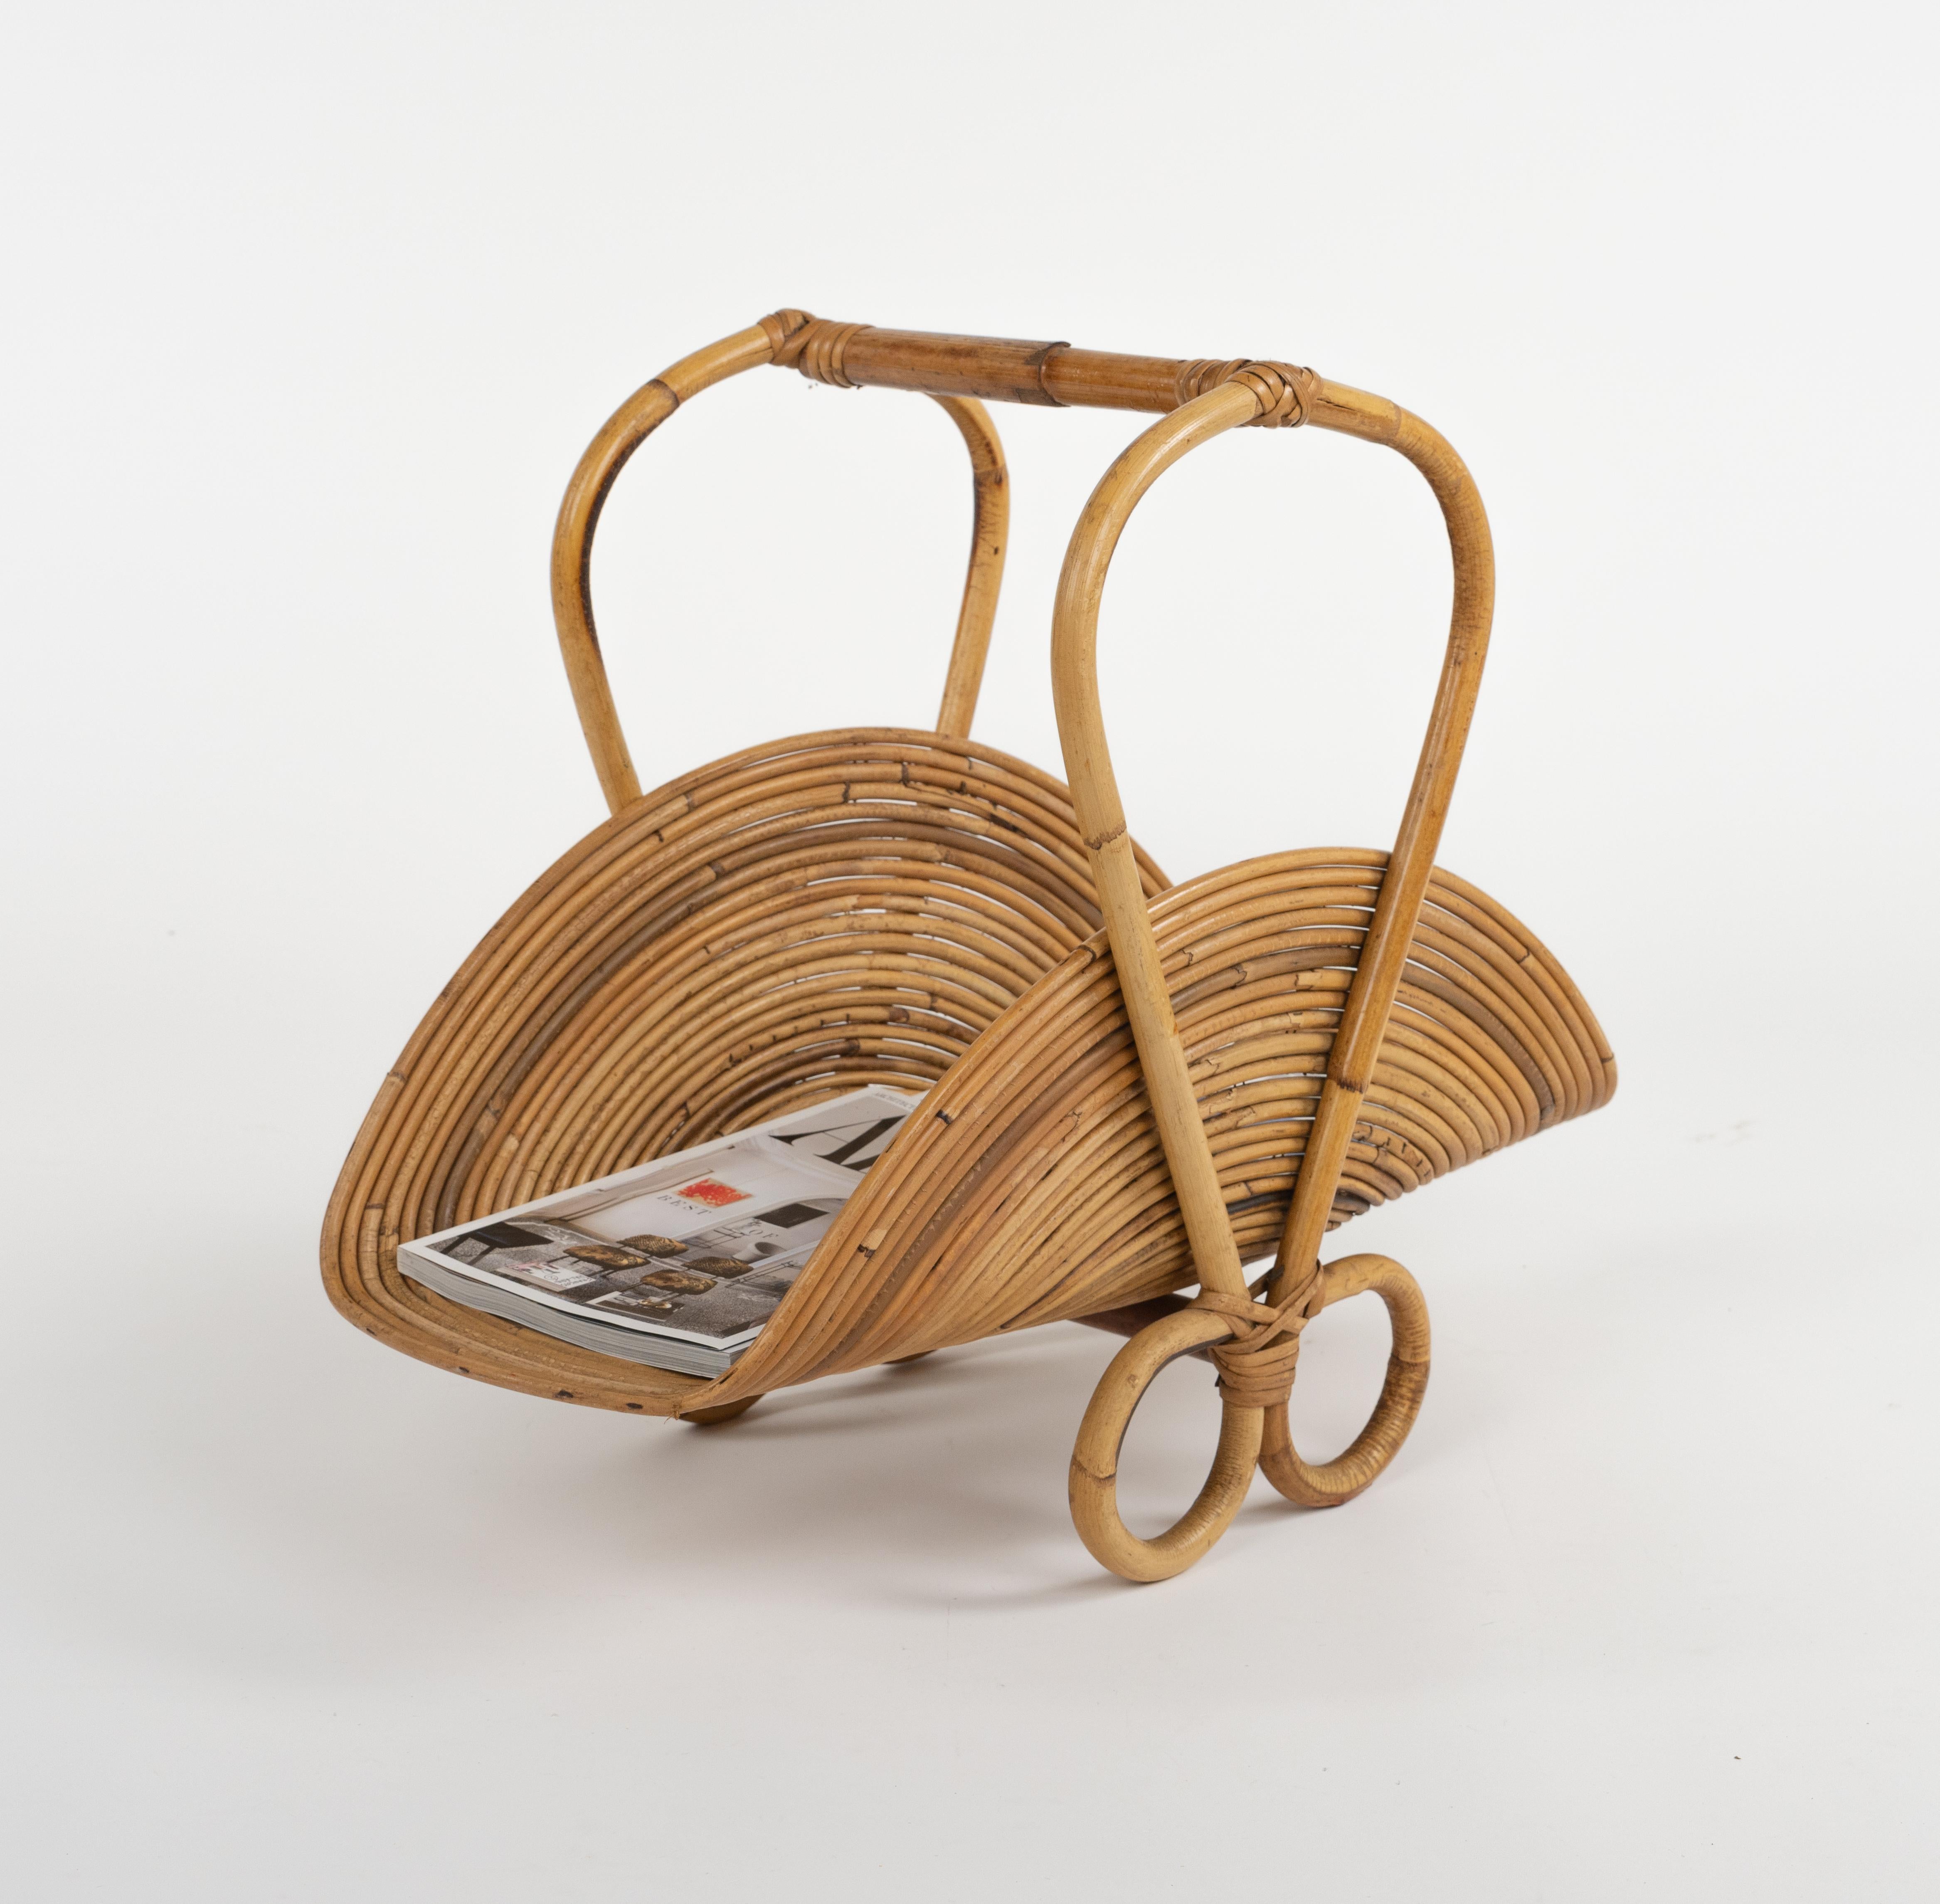 Midcentury Bamboo and Rattan Magazine Rack Vivai Del Sud Style, Italy 1960s For Sale 3